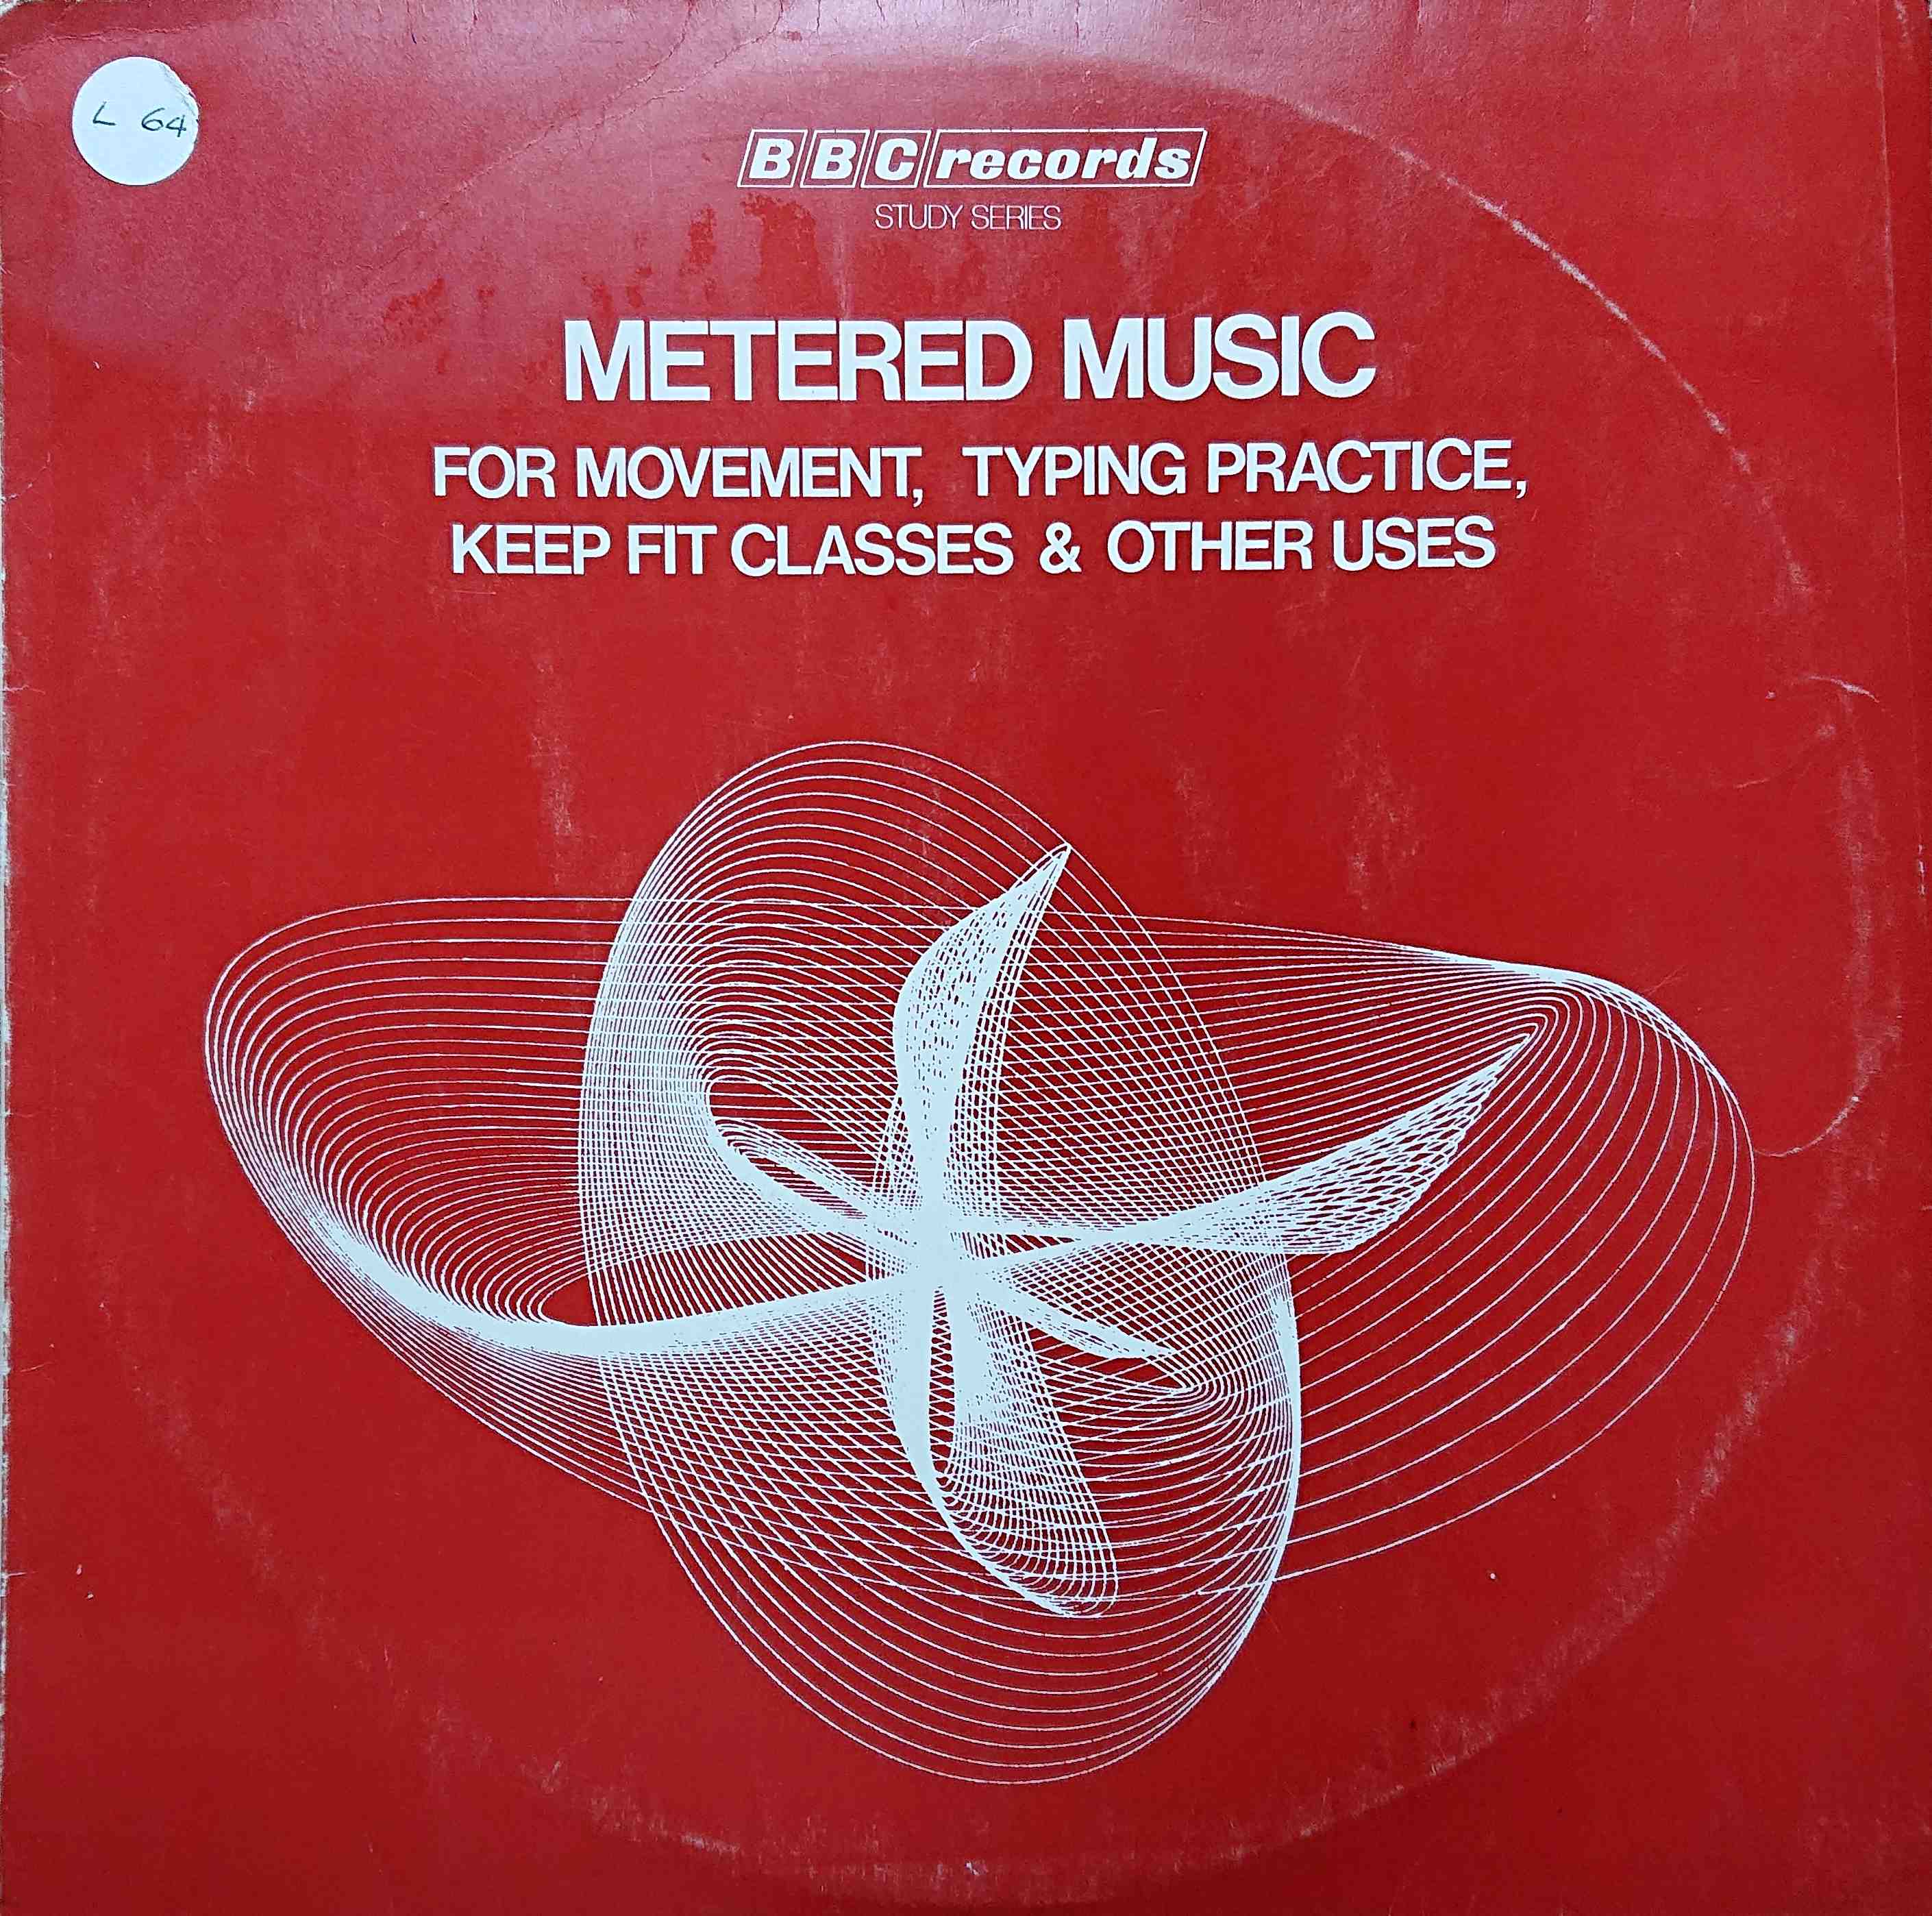 Picture of RESR 24 Metered music by artist Vera Gray / Pamela Kenway from the BBC albums - Records and Tapes library